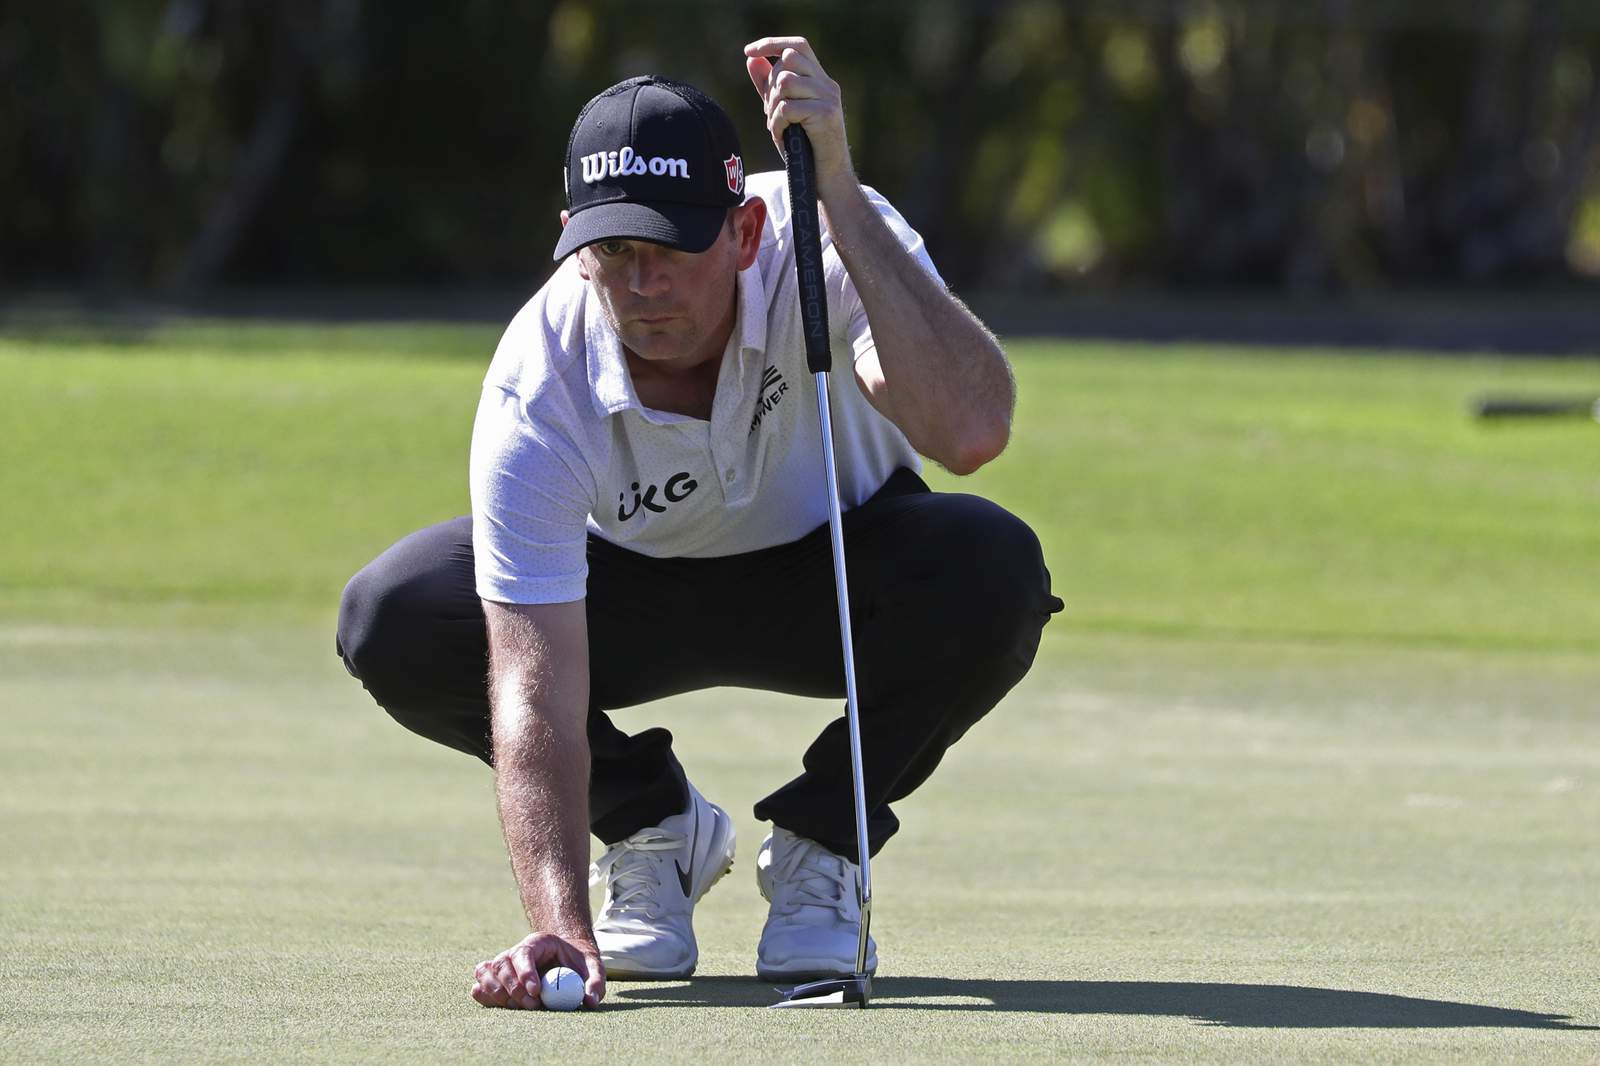 Steele takes lead with 61 to get another chance in Sony Open